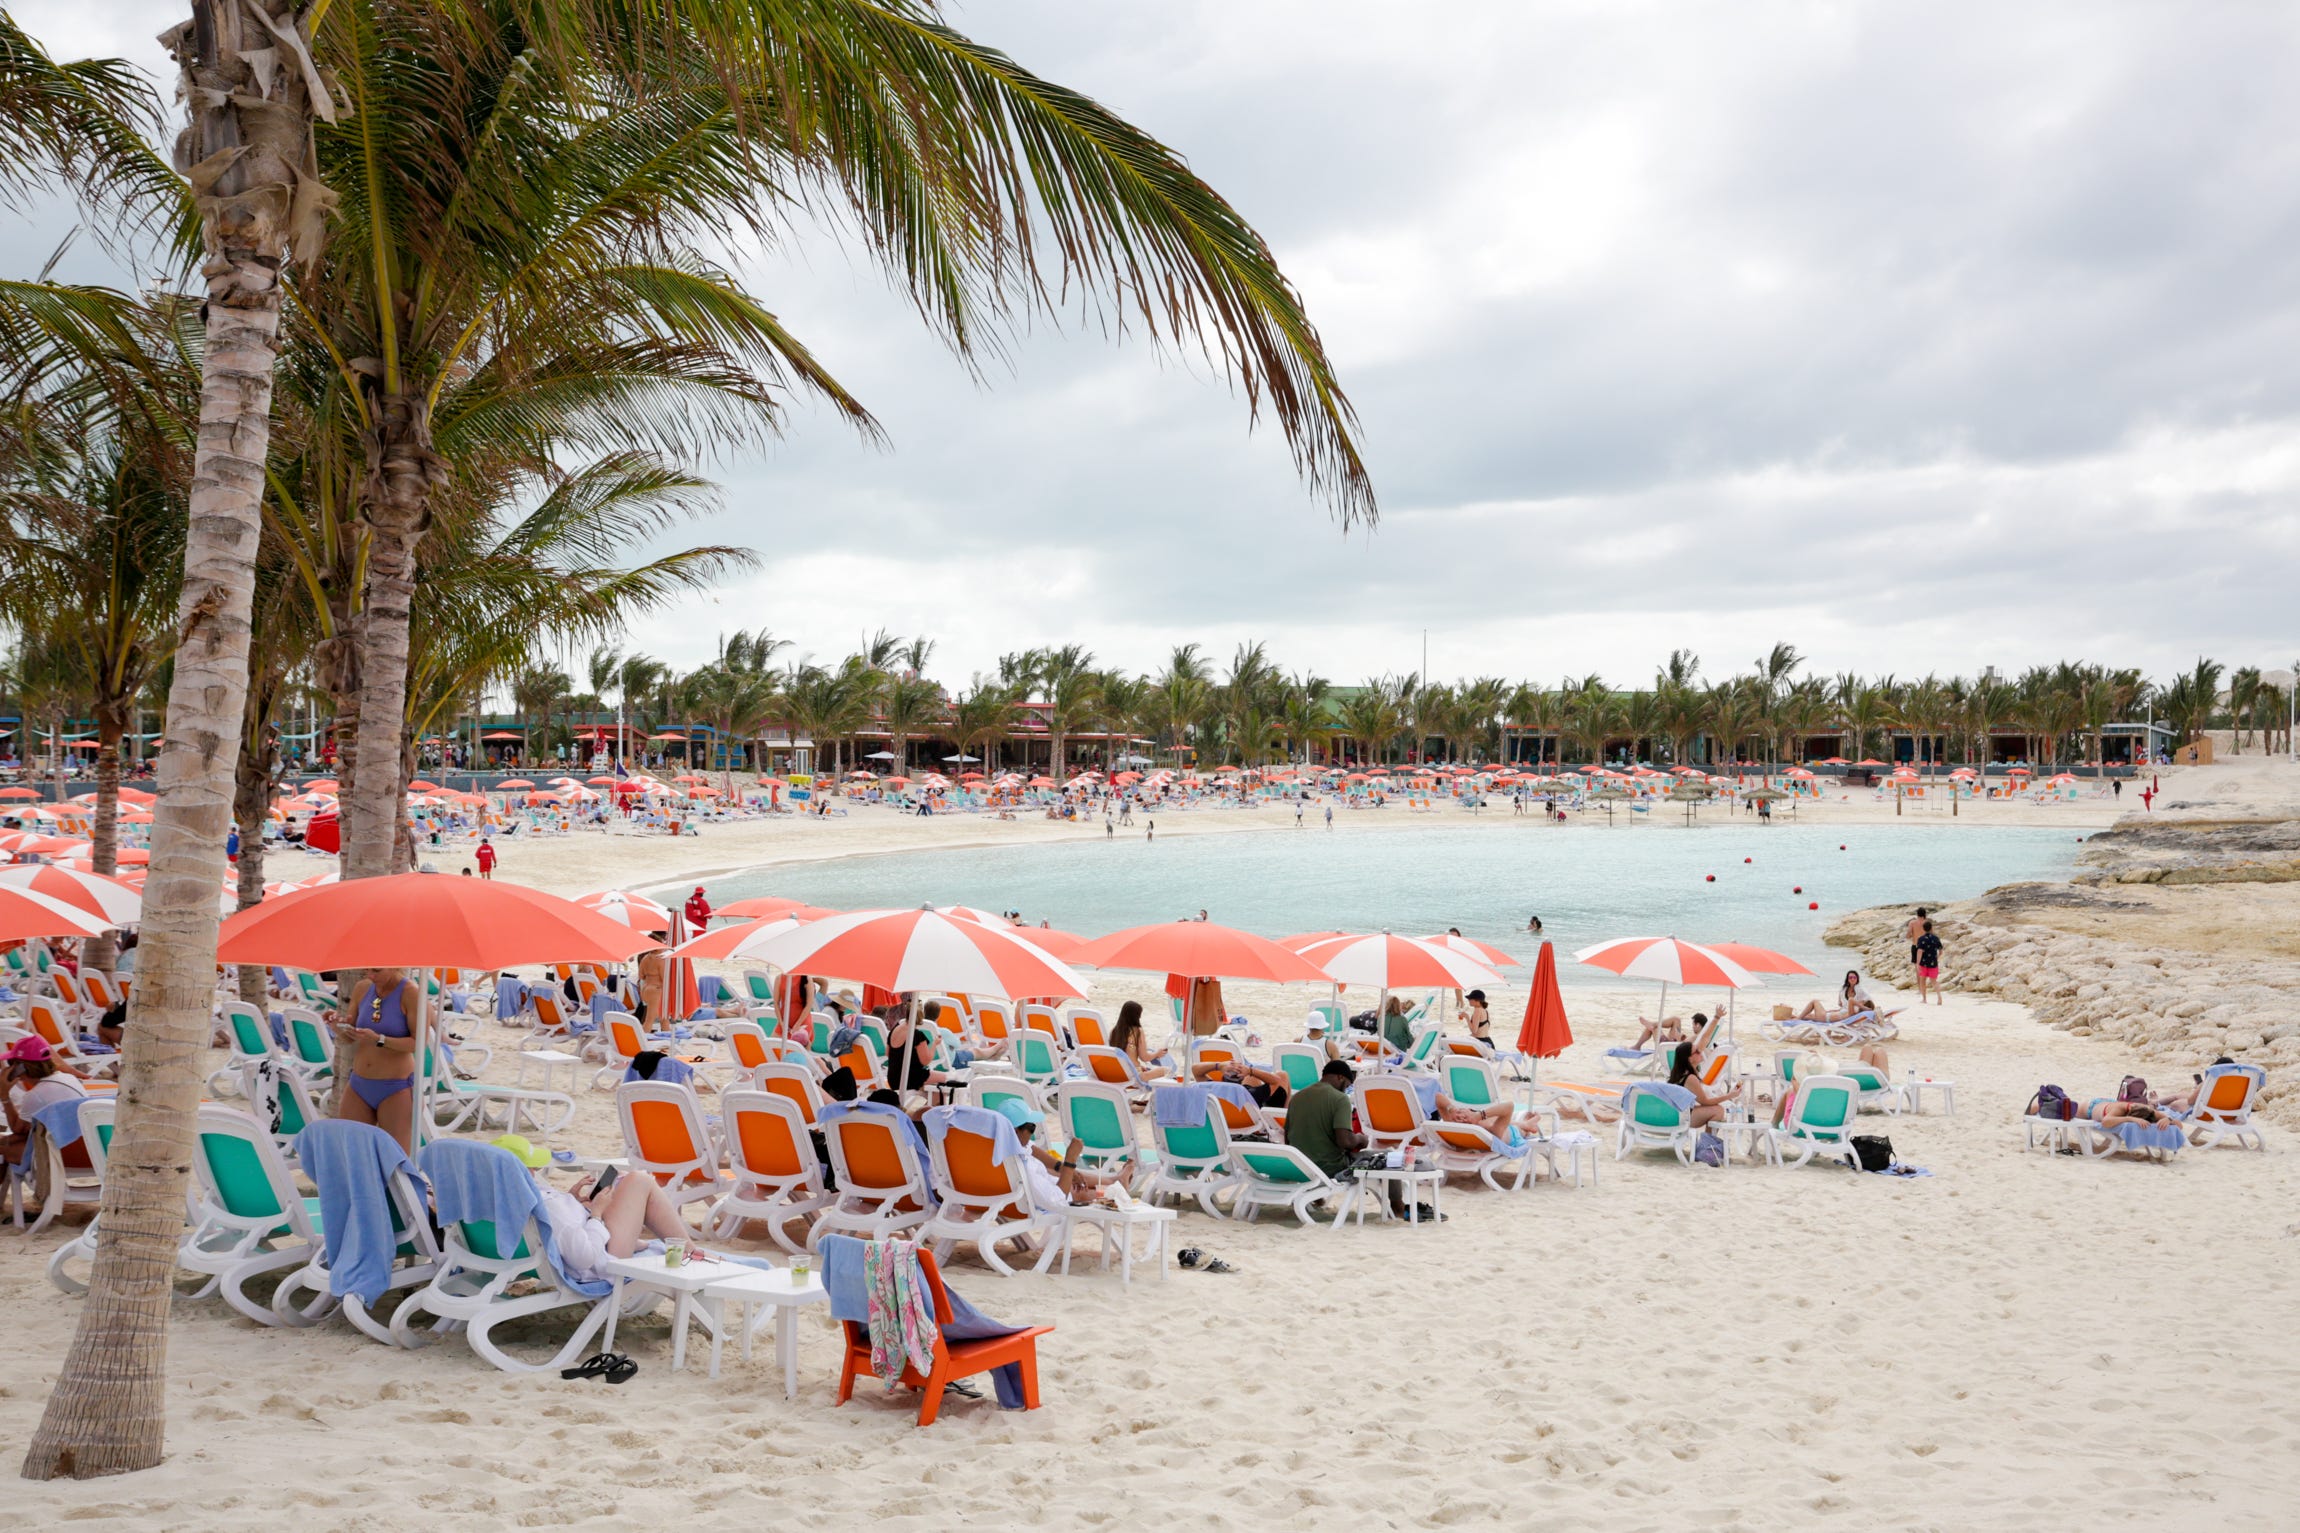 <ul class="summary-list"><li>I spent an afternoon at Hideaway Beach, the new adults-only area of Royal Caribbean's private island.</li><li>The cruise brand has invested $350 million into <a href="https://www.businessinsider.com/review-royal-caribbean-bahamas-cococay-private-island-photos-2023-3">Perfect Day of CocoCay</a>, launched in 2019. </li><li>About two-thirds of Royal Caribbean's guests are expected to stop at the private Bahamas island this year.</li></ul><p>What do you get when you cross a Las Vegas pool club with a cruise ship and a private island? You get <a href="https://www.businessinsider.com/royal-caribbeans-250-million-private-island-seeing-strong-demand-photos-2023-3">Royal Caribbean's new Hideaway Beach.</a></p><p>In January, the popular cruise line unveiled the newest extension of its <a href="https://www.businessinsider.com/icon-of-the-seas-wonder-of-the-seas-royal-caribbean-2024-1">Perfect Day at CocoCay</a> private island in the Bahamas. And in a maybe unexpected move from its family-friendly image, the new Hideaway Beach is adults-only, loud, and boozy.</p><p>Like, very boozy.</p><p>When I visited the recently completed section during a short complimentary press sailing on Royal Caribbean's newest ship, <a href="https://www.businessinsider.com/royal-caribbean-icon-of-the-seas-cruise-ship-review-photos-2024-2">Icon of the Seas</a>', in late January, I immediately got flashbacks to my first and only encounter with an Atlantic City, New Jersey, pool club. (Before you ask — no, it wasn't my idea).</p><div class="read-original">Read the original article on <a href="https://www.businessinsider.com/royal-caribbean-perfect-day-cococay-new-adult-only-area-review-2024-2">Business Insider</a></div>